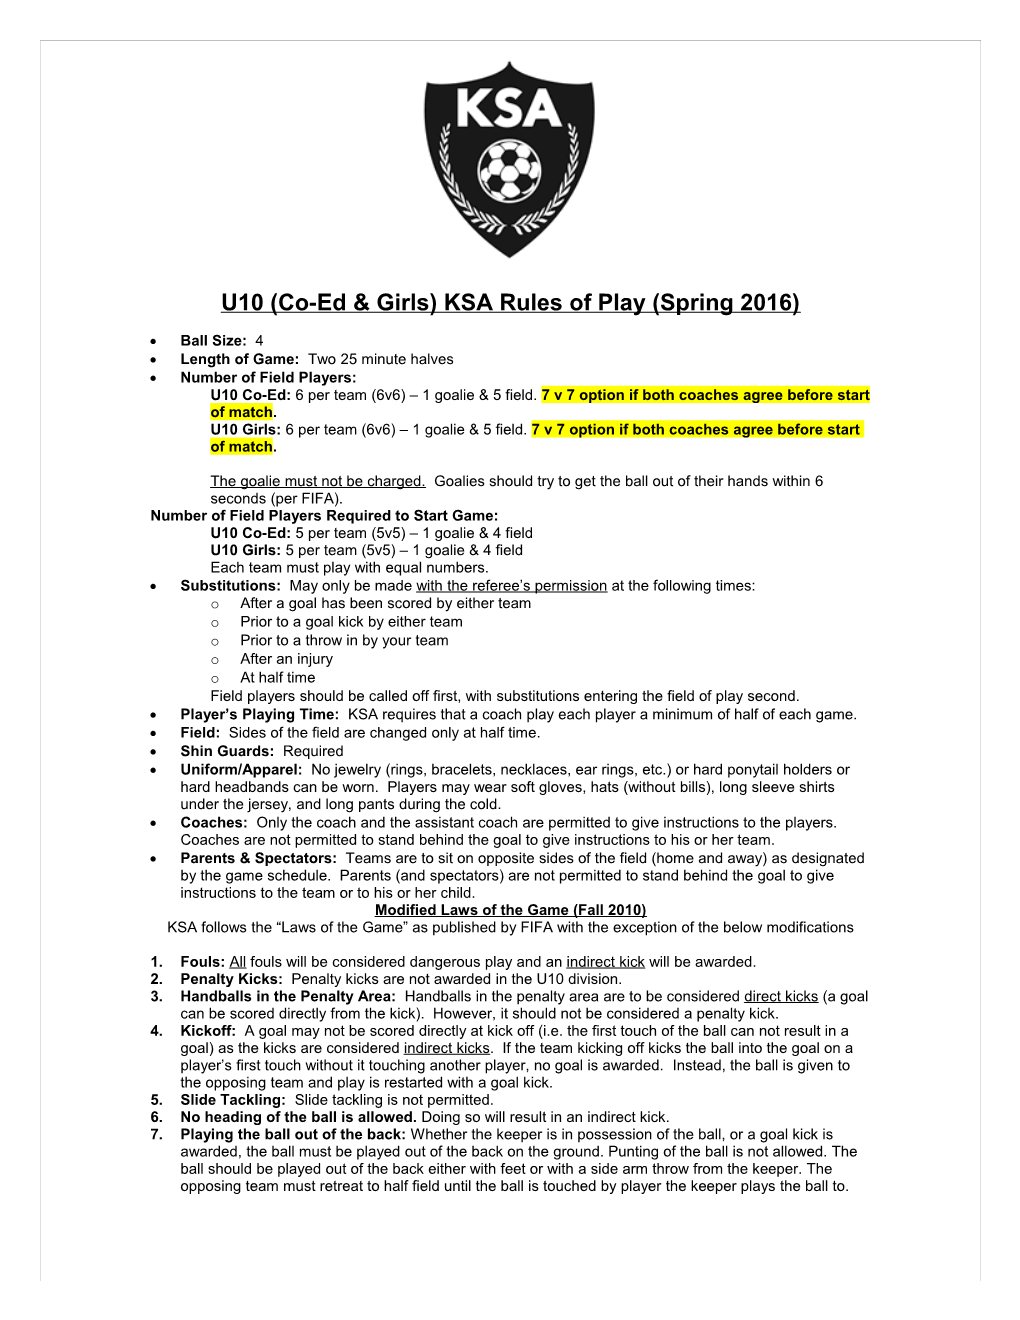 U6 Laws of the Game (KSA Specific)